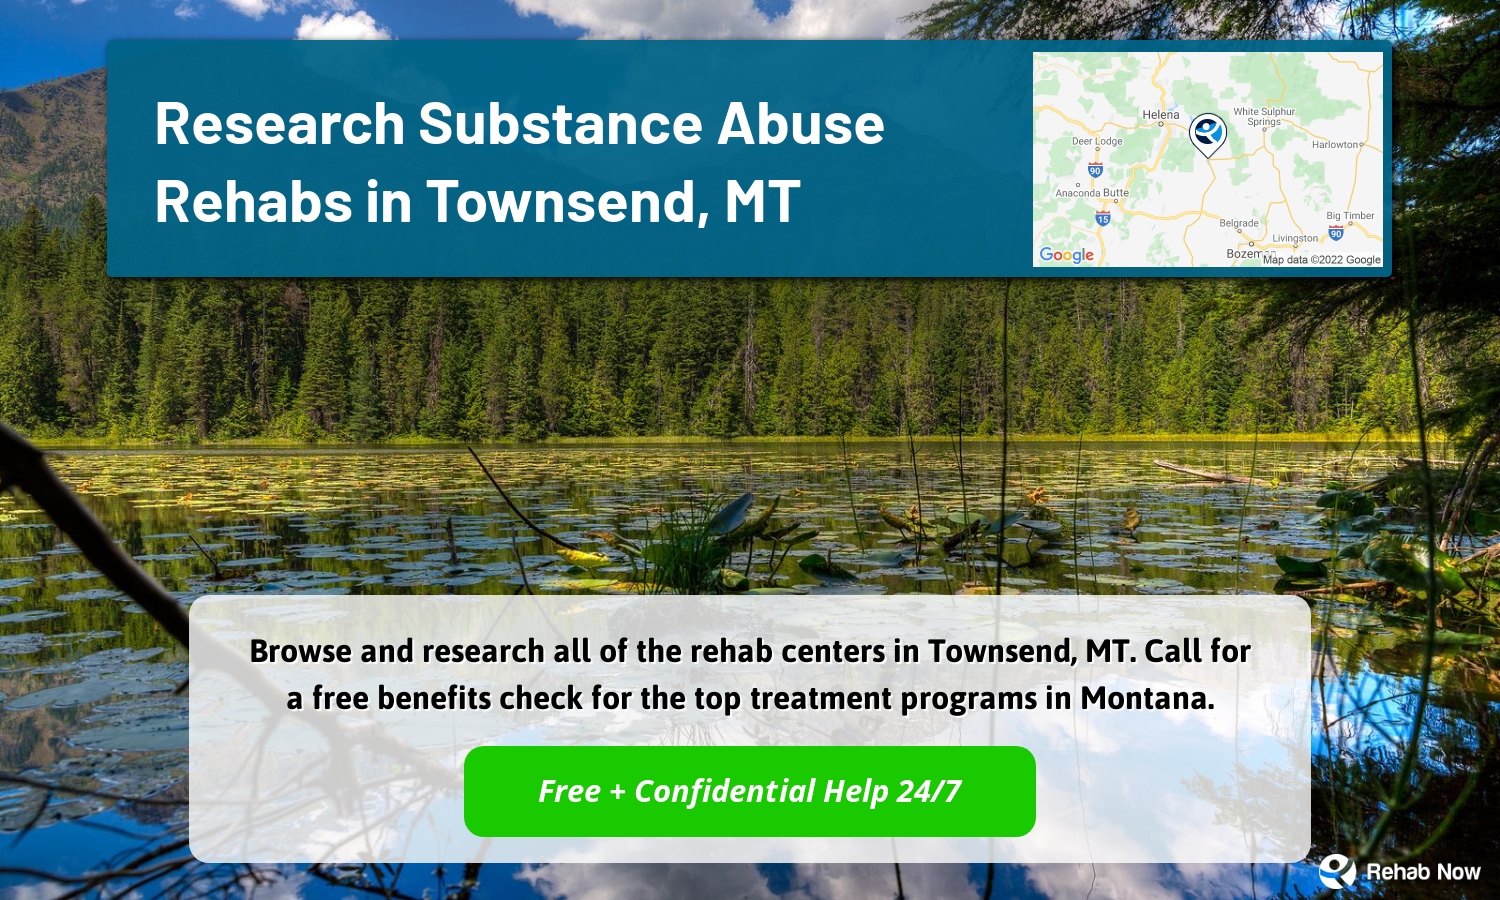 Browse and research all of the rehab centers in Townsend, MT. Call for a free benefits check for the top treatment programs in Montana.